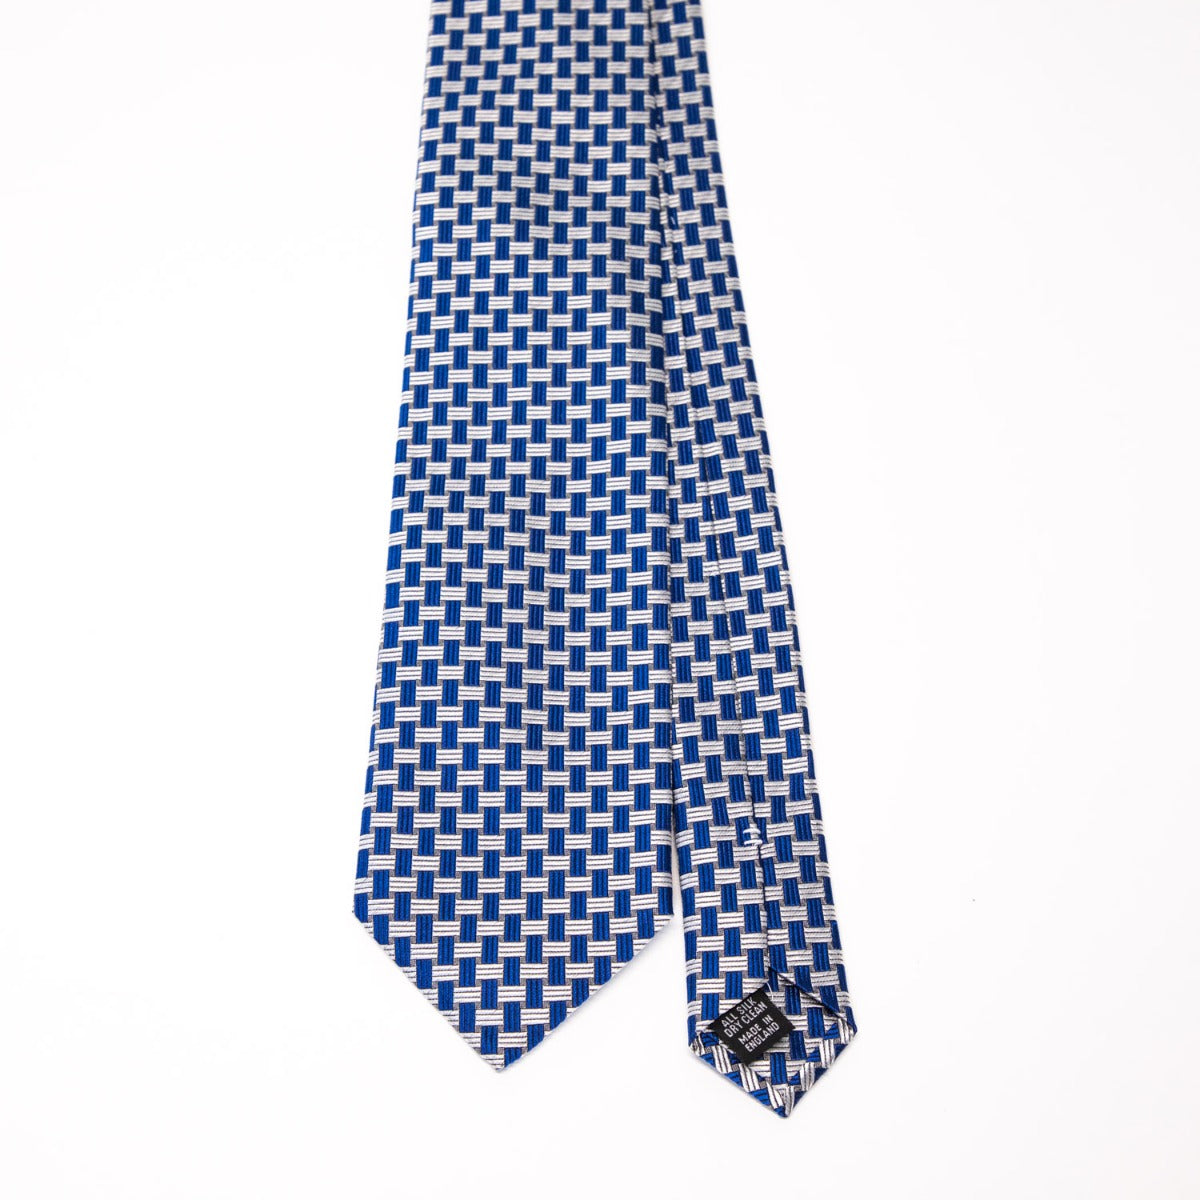 A Sovereign Grade Blue Basket Weave Silk tie from KirbyAllison.com, featuring a cobalt blue and white checkered pattern on a white background.